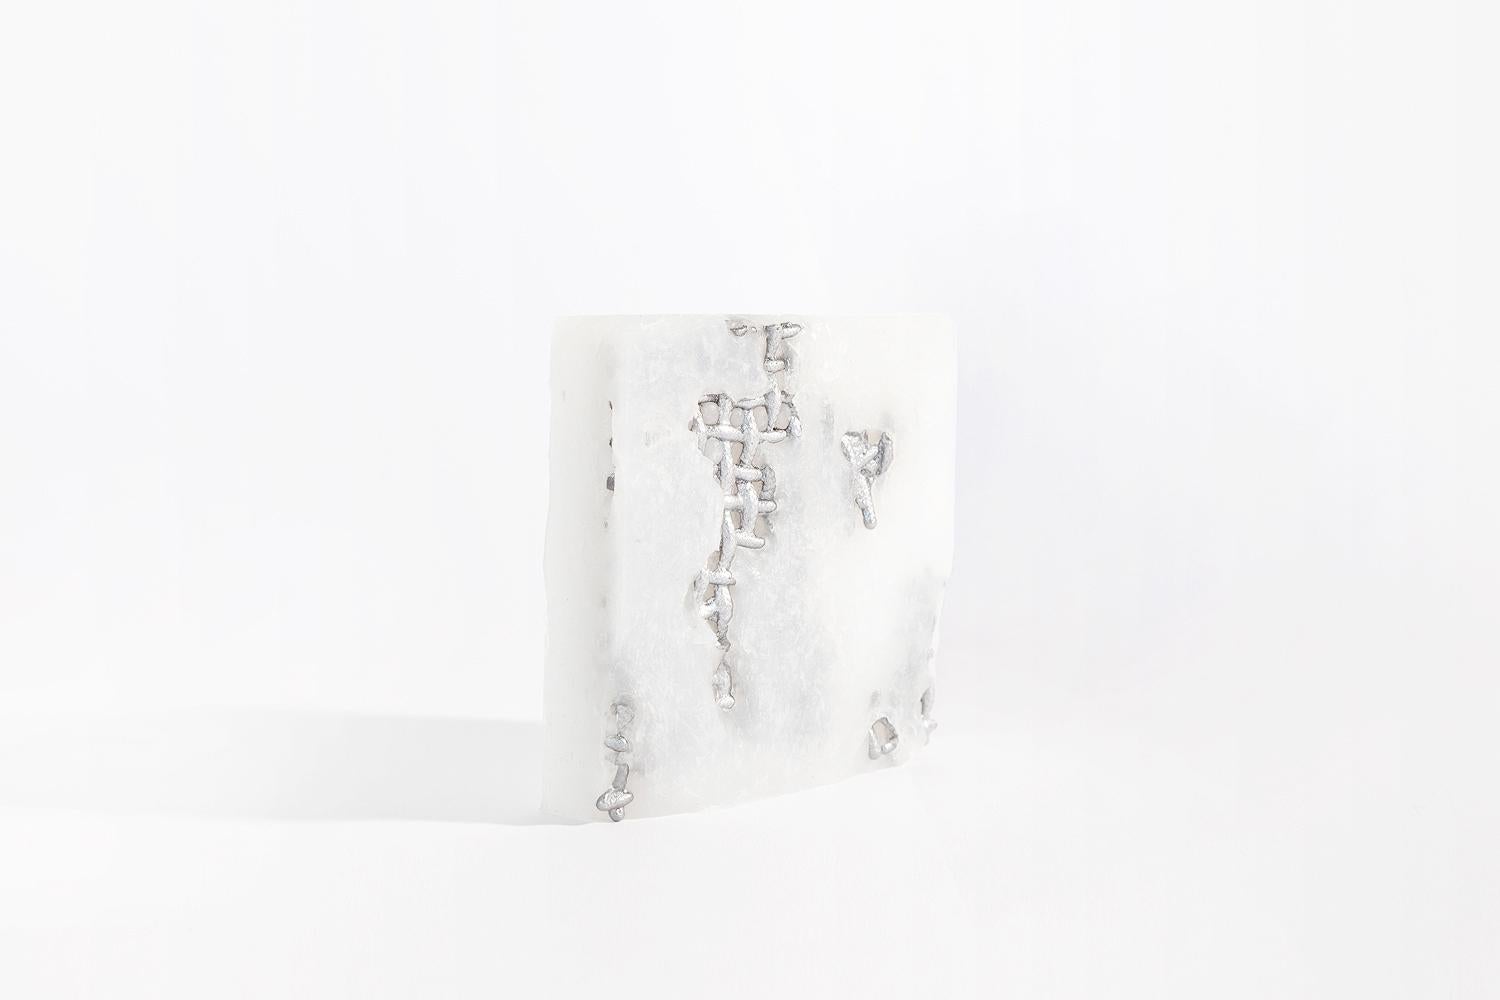 Post-Modern Contemporary Metal Cast Sculpture, Aluminum Cast in Silicone 4 by Mimi Jung For Sale